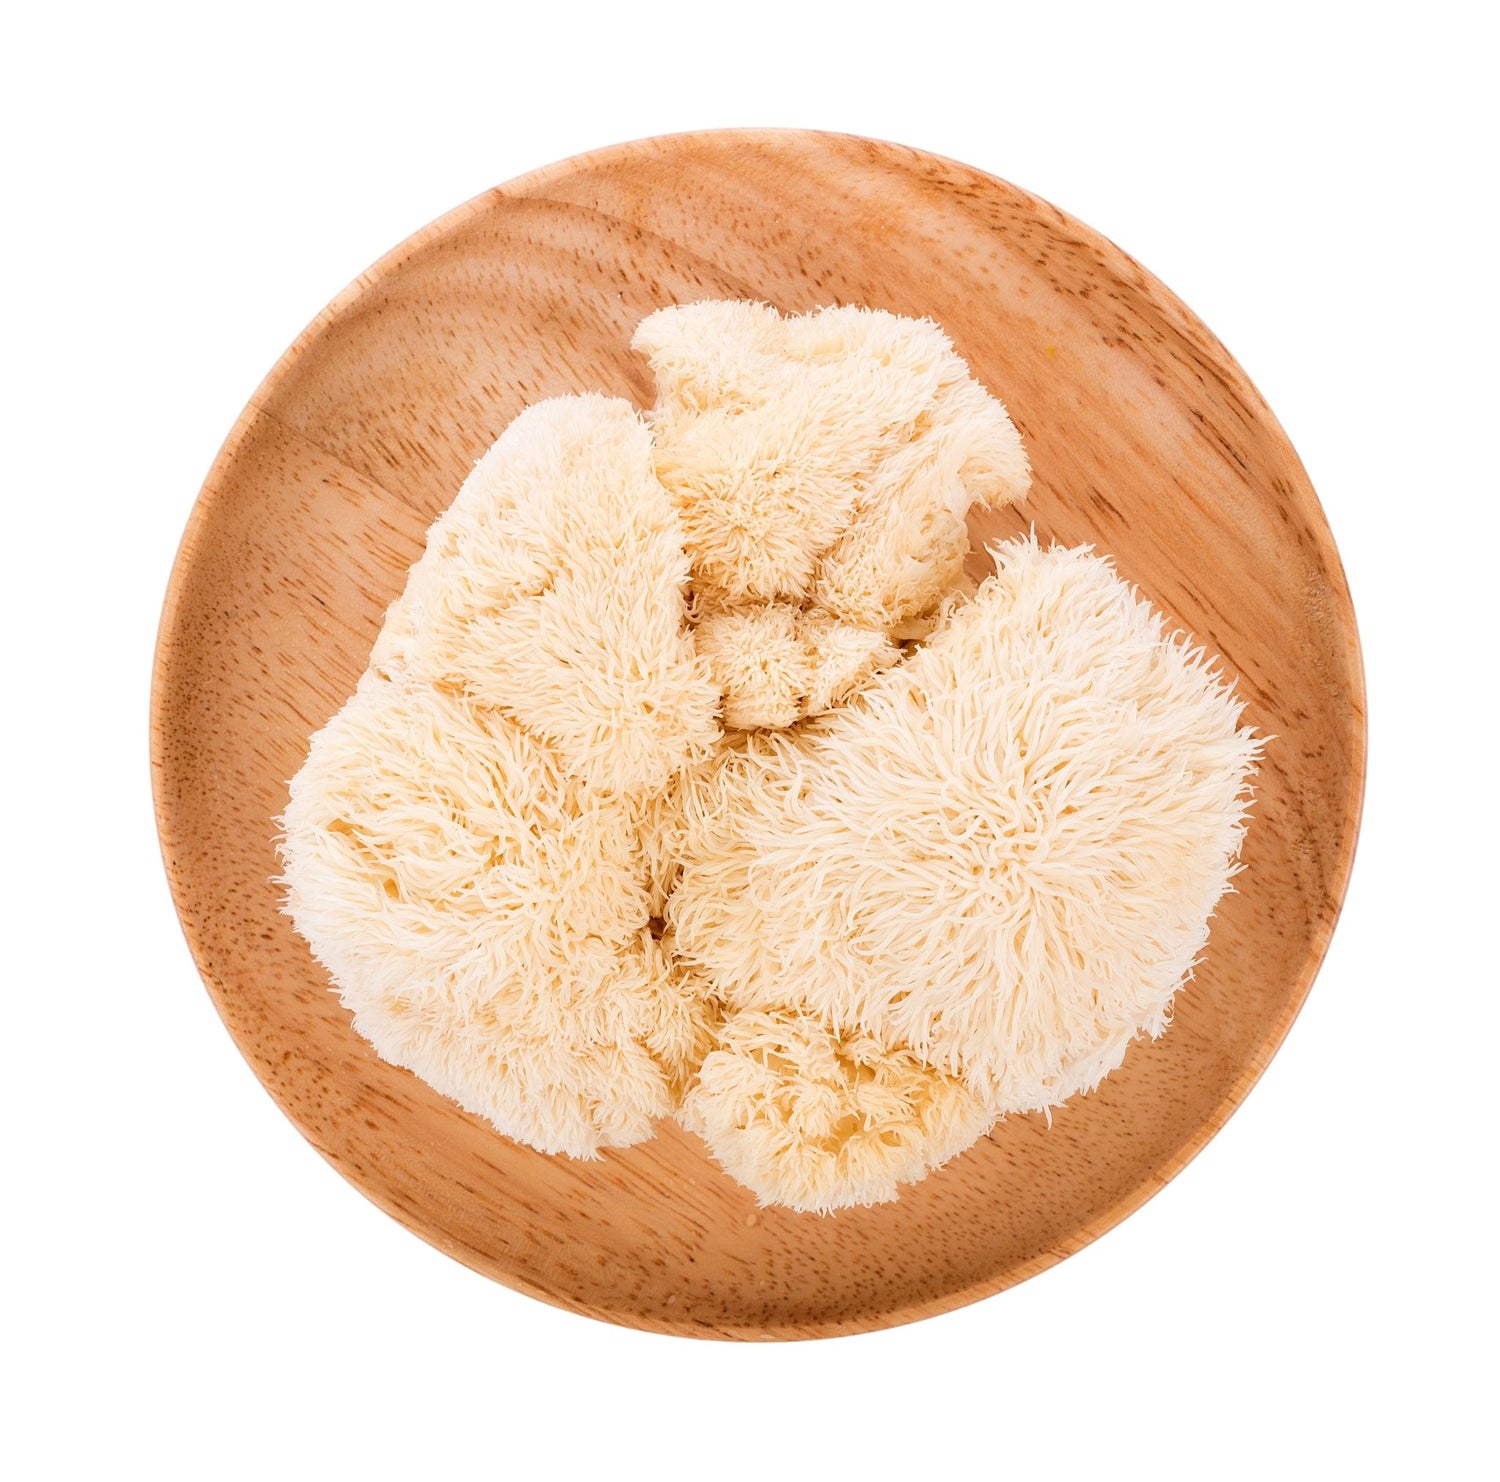 Lion’s Mane: What You Need to Know About the Super Supplement | FOCL